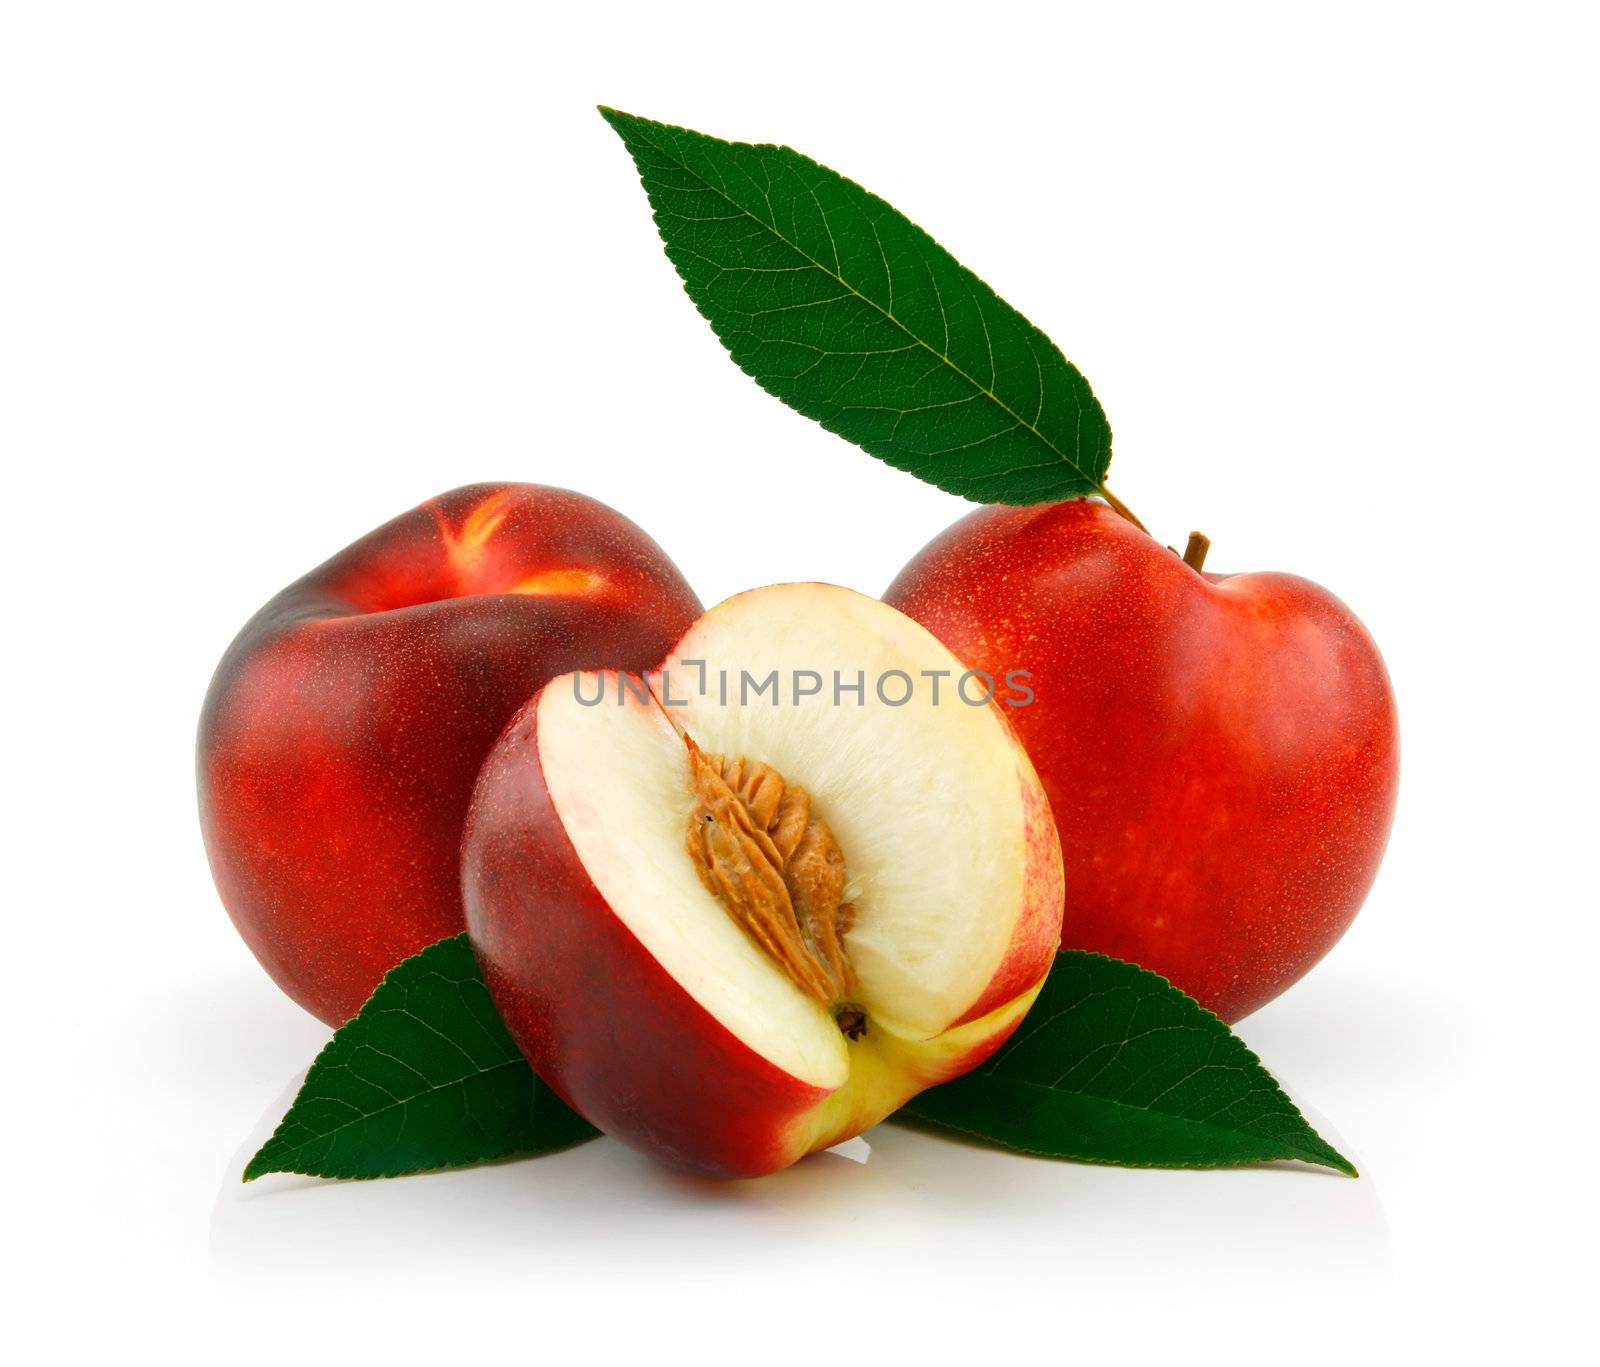 Ripe Sliced Peach (Nectarine) with Green Leafs Isolated on White Background